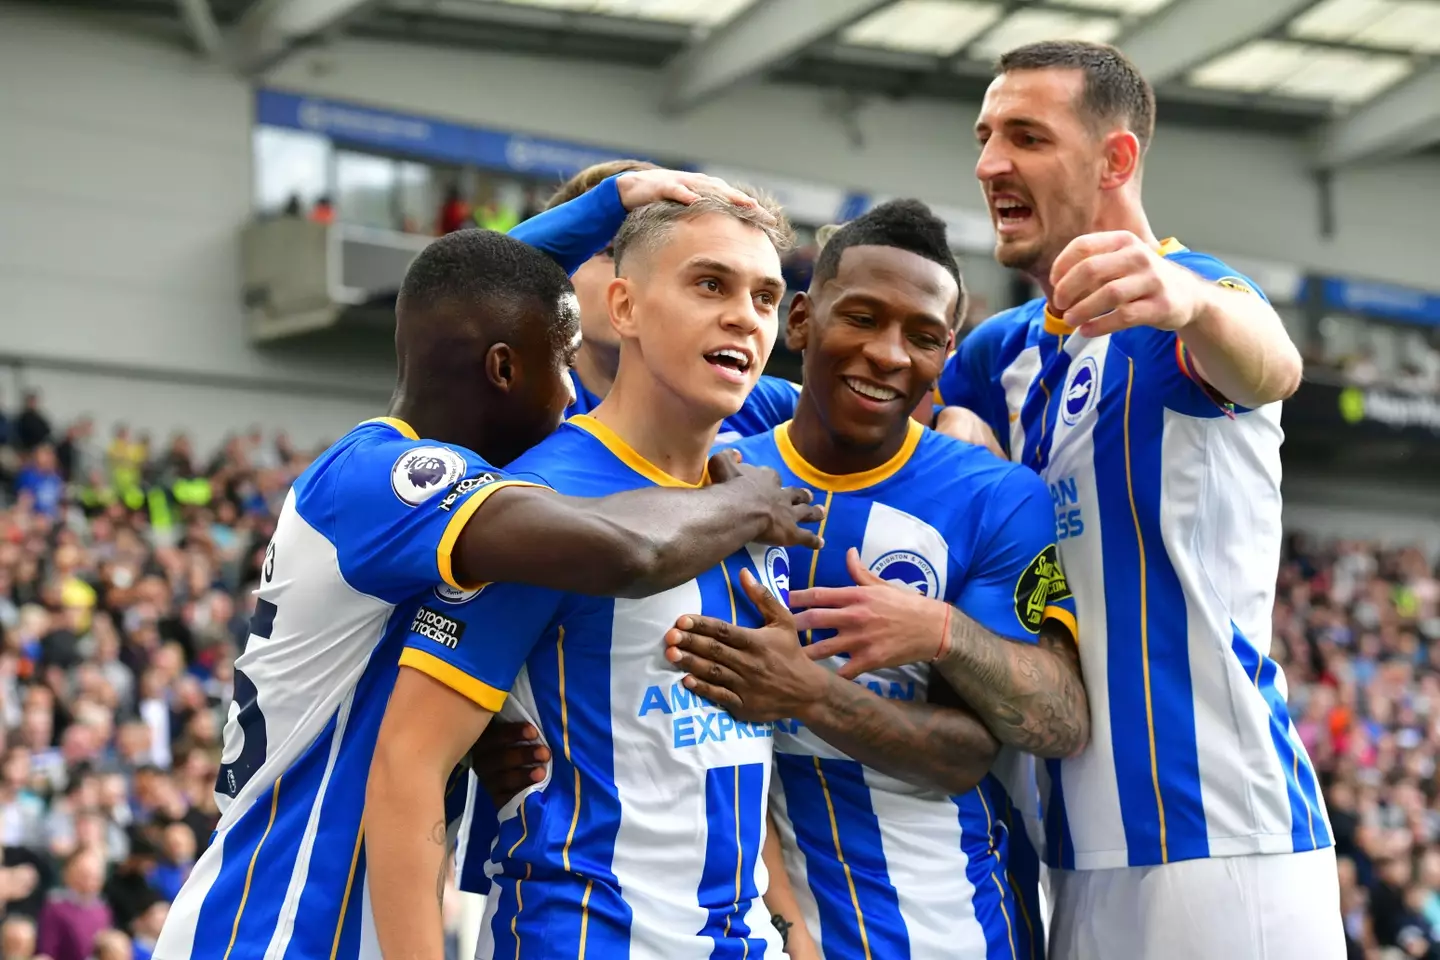 Brighton attacker Leandro celebrates putting his side ahead on Saturday afternoon. (Image